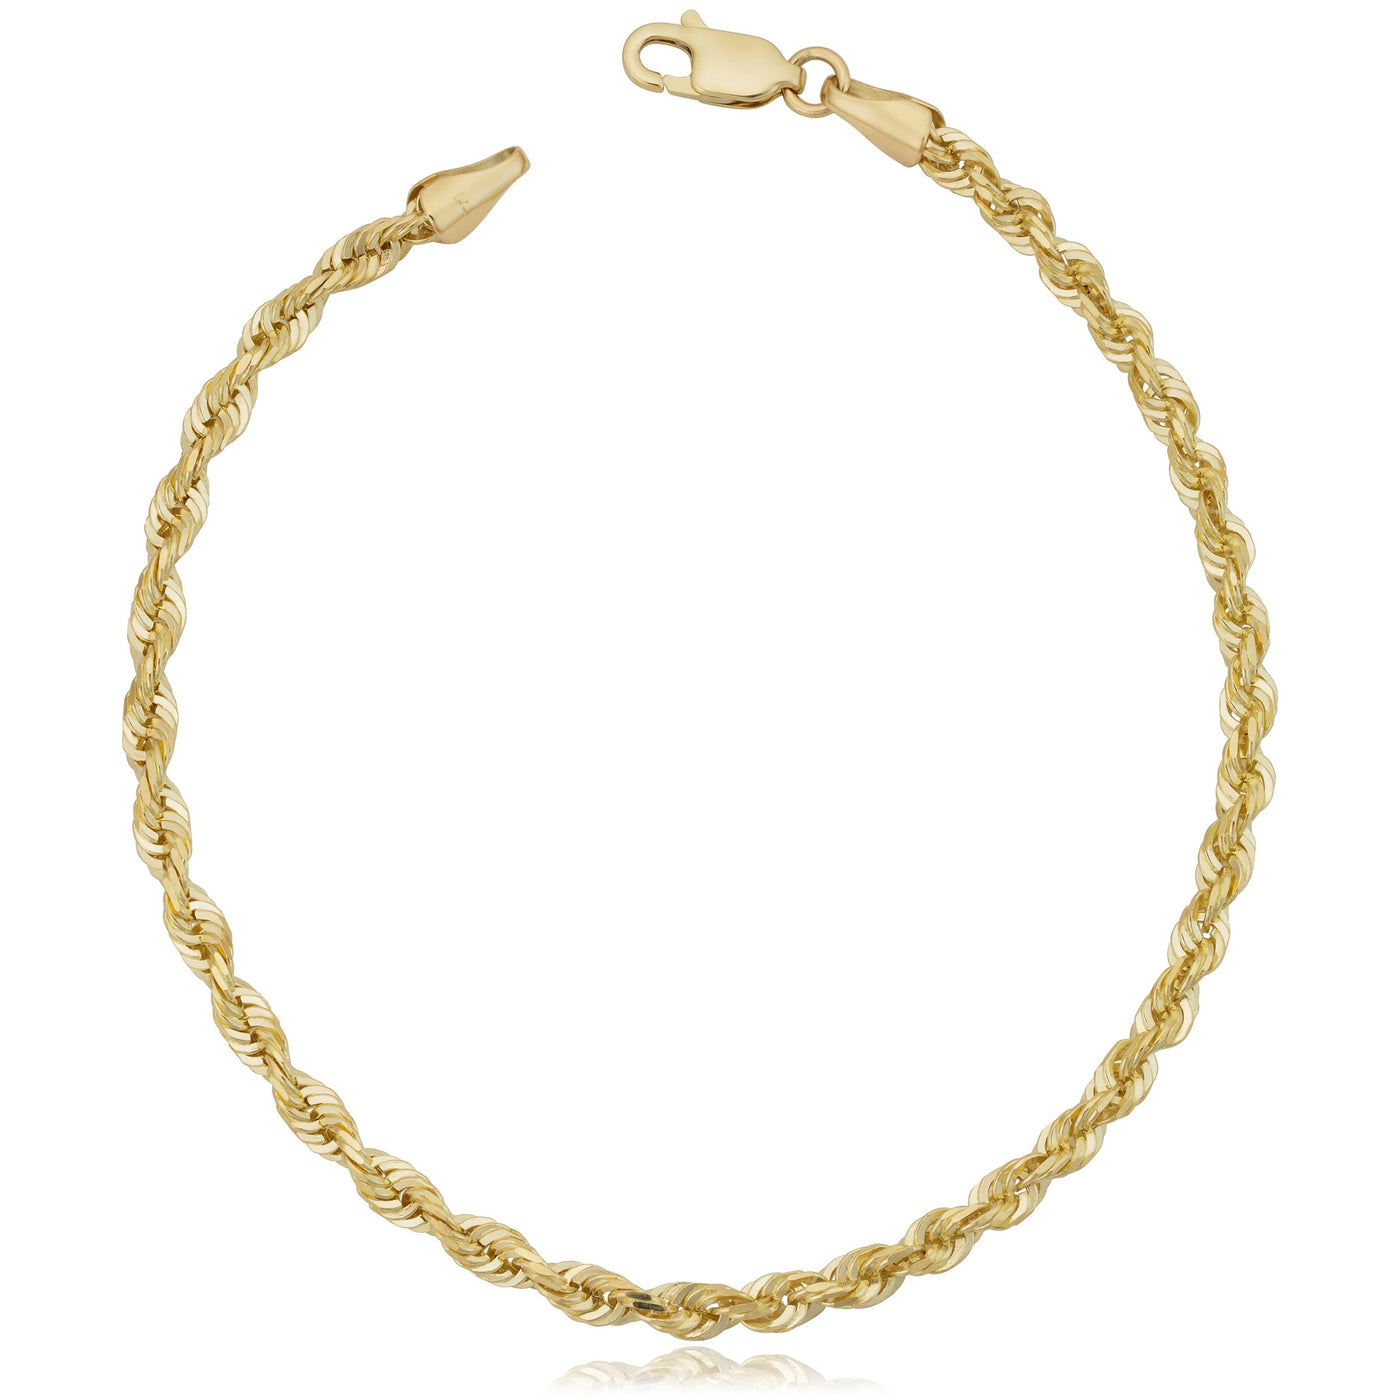 SOLID GOLD 3MM ROPE CHAIN BRACELET